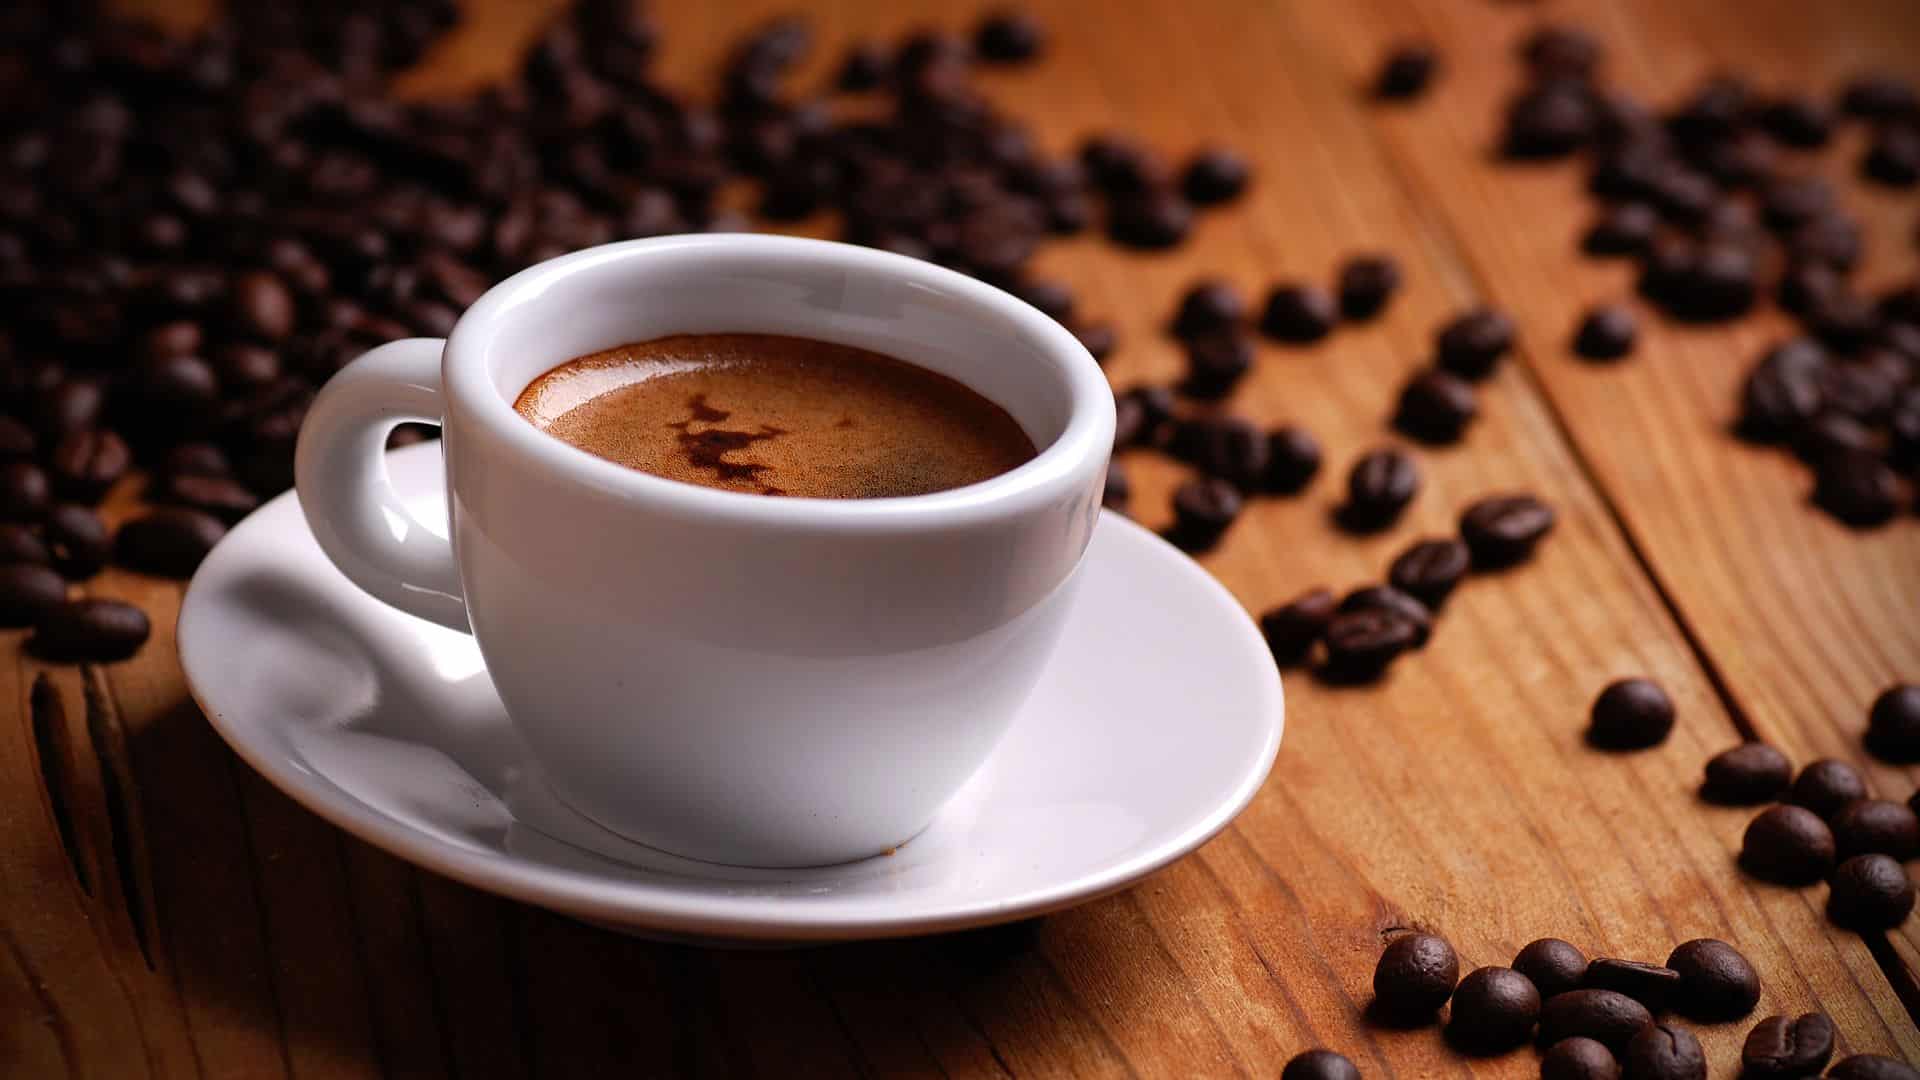 An espresso sits on a table surrounded by coffee beans.